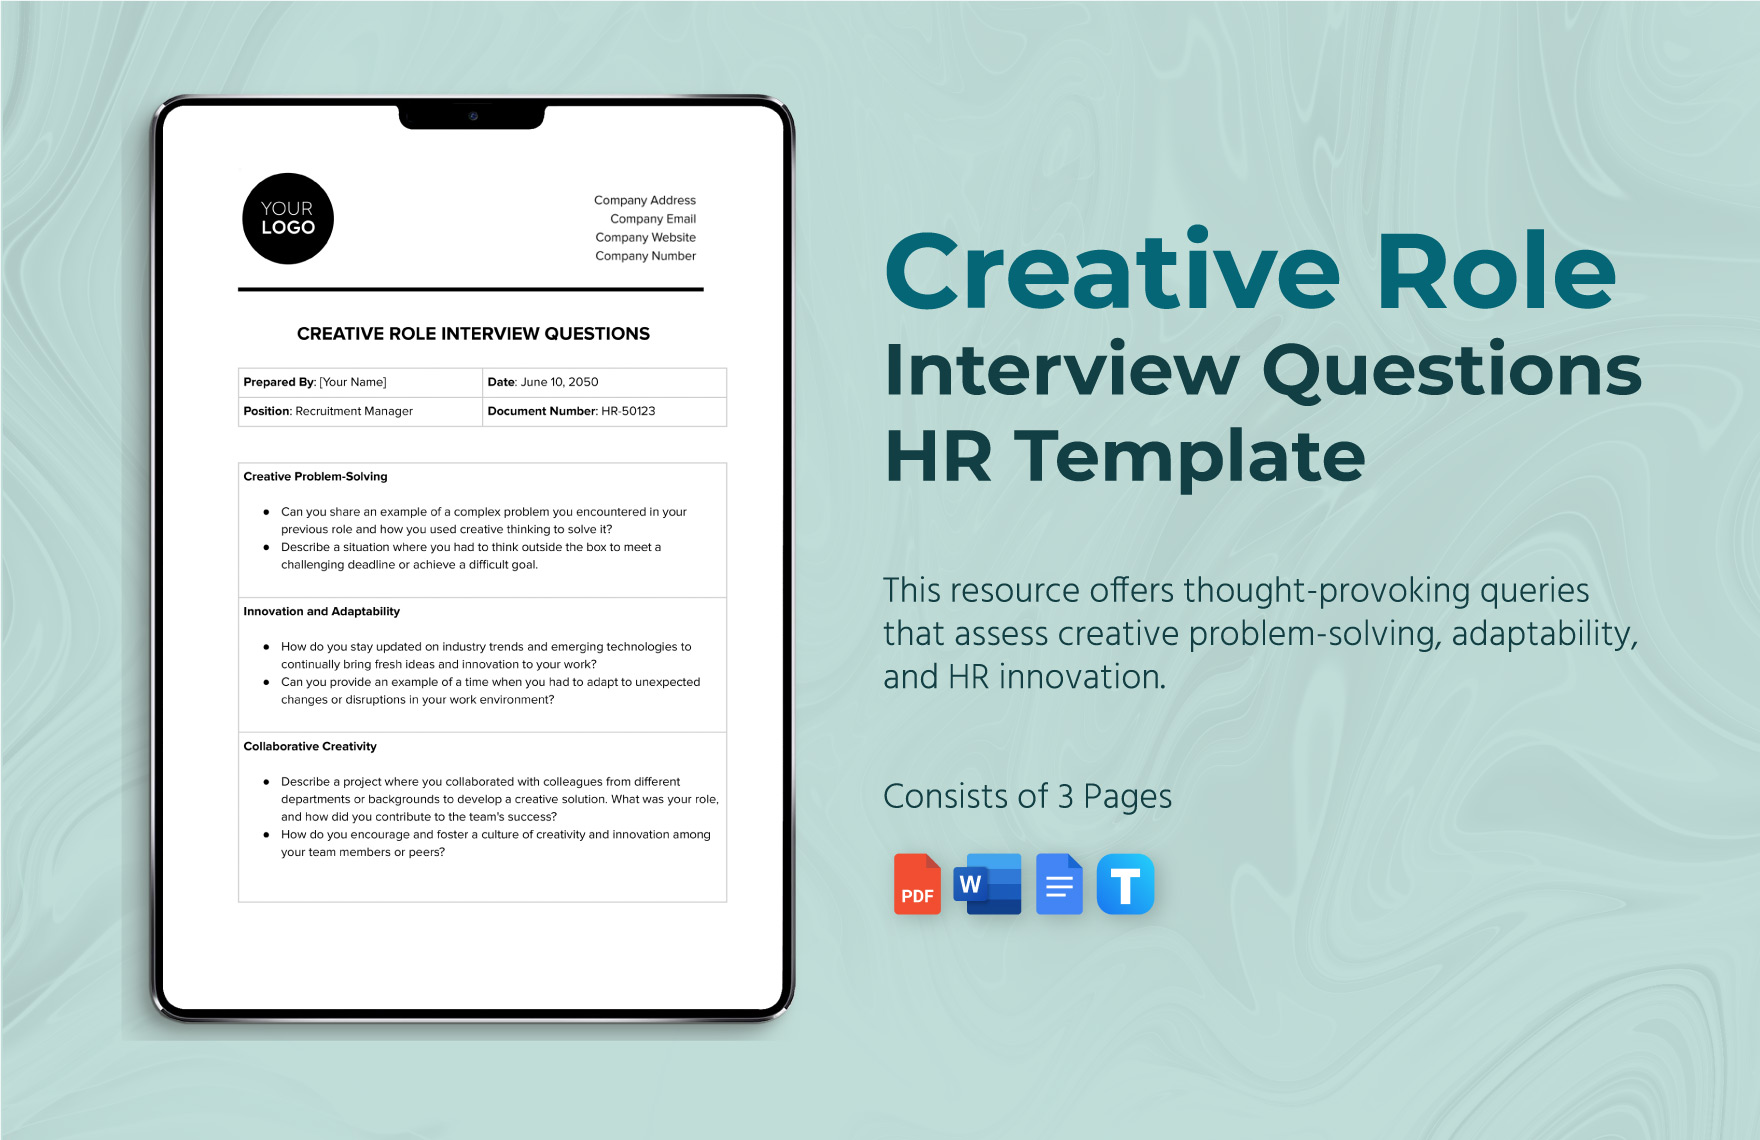 Creative Role Interview Questions HR Template